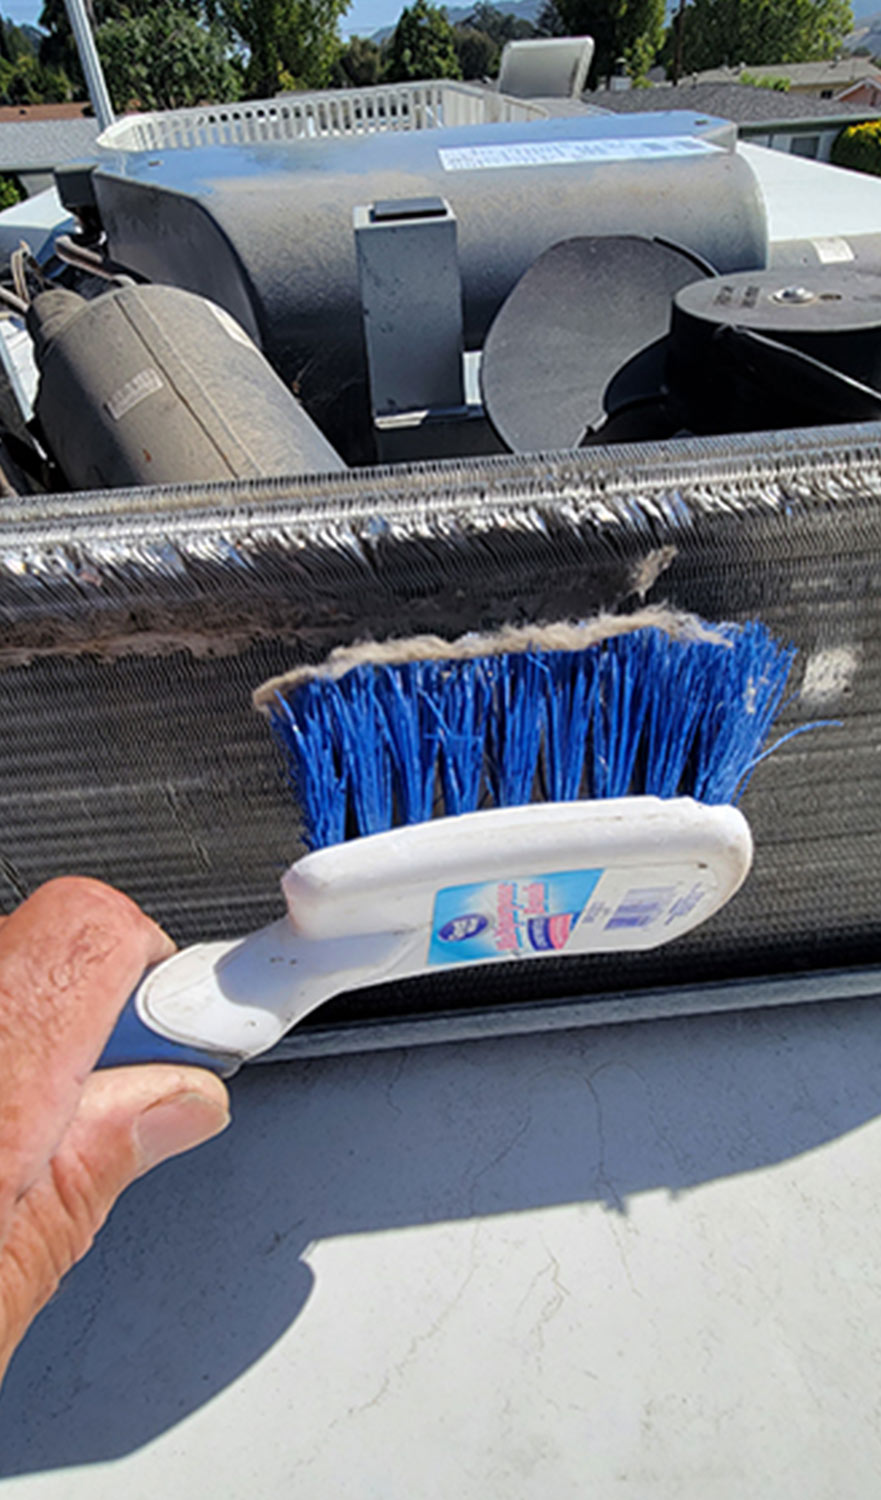 a basic utility brush is used to lightly remove debris from the condenser